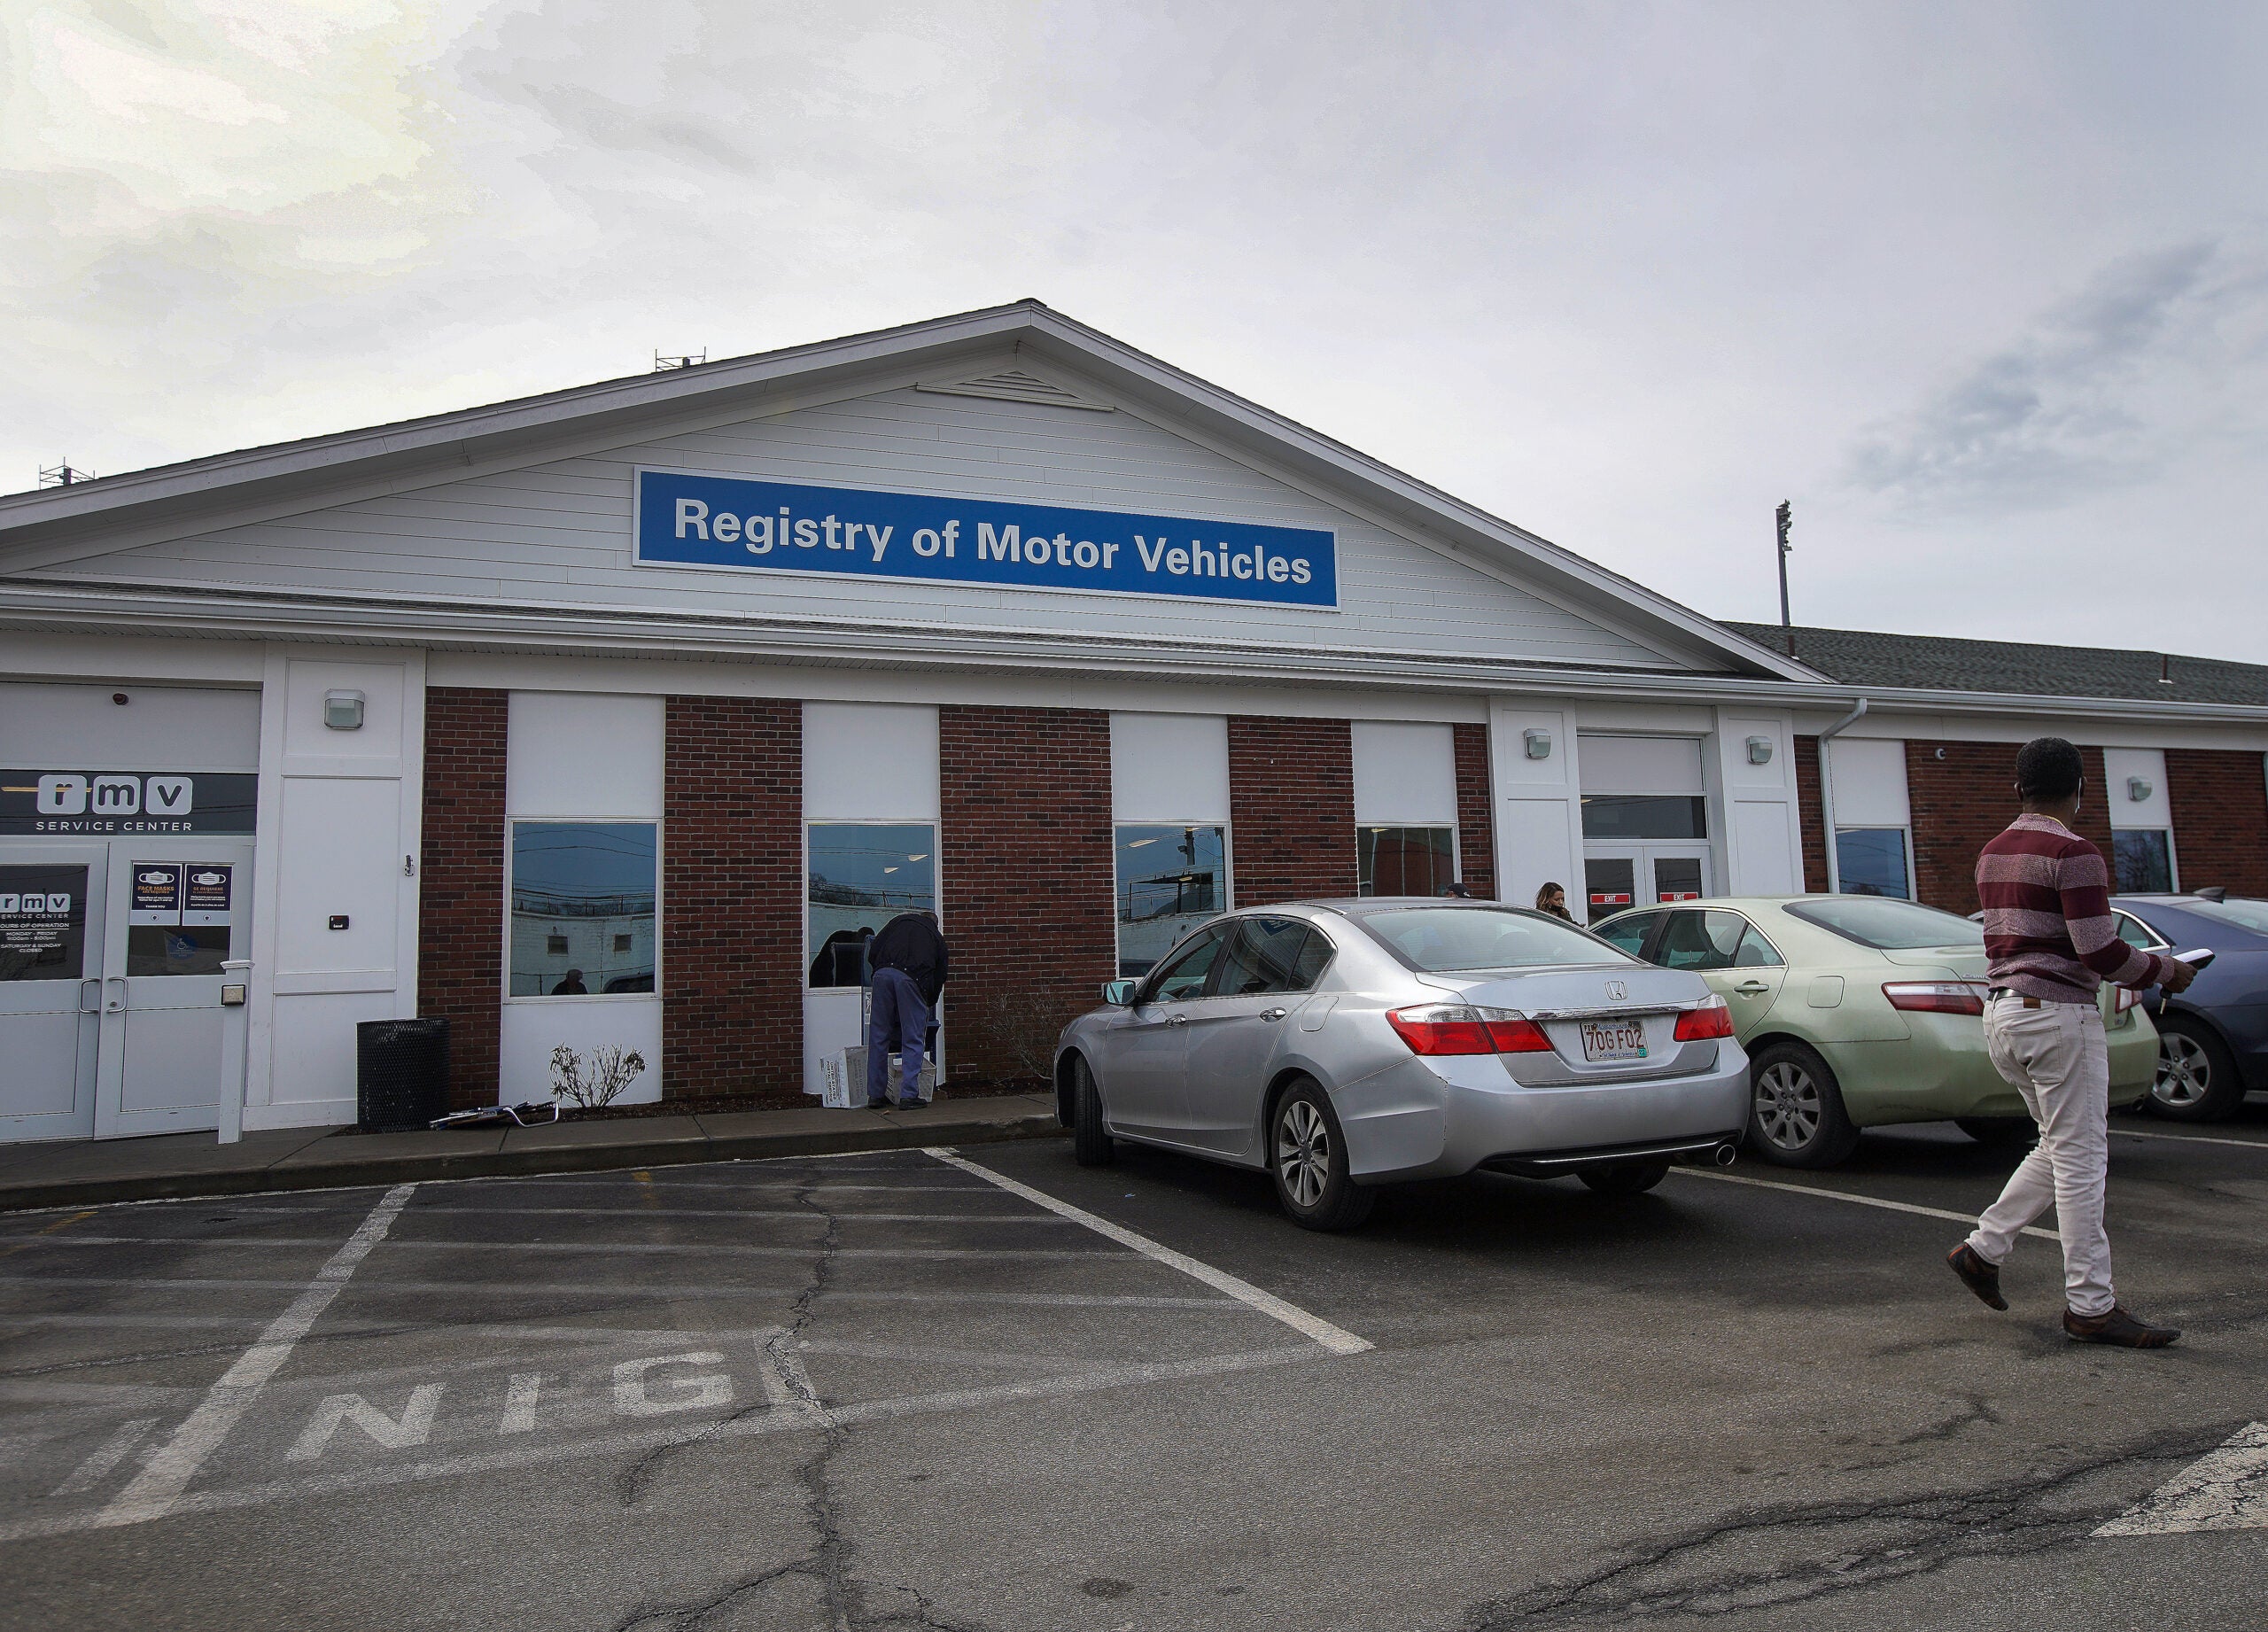 Three parked cars and two people stand outside a Massachusetts Registry of Motor Vehicles building